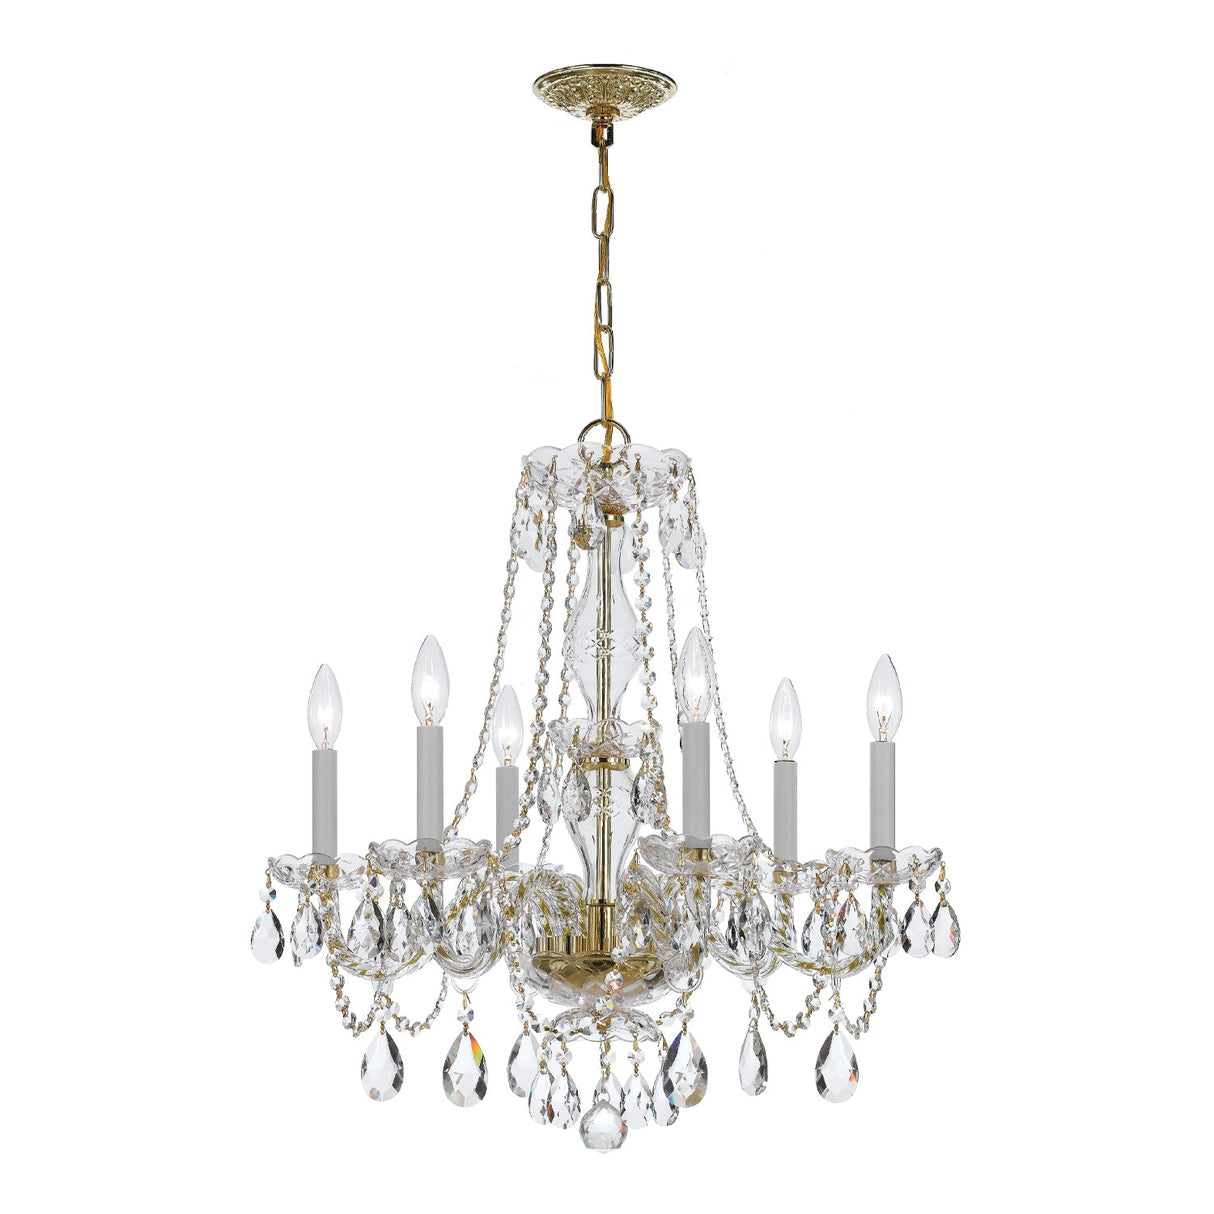 Traditional Crystal 6 Light Crystal Polished Brass Chandelier 5086-PB-CL-MWP